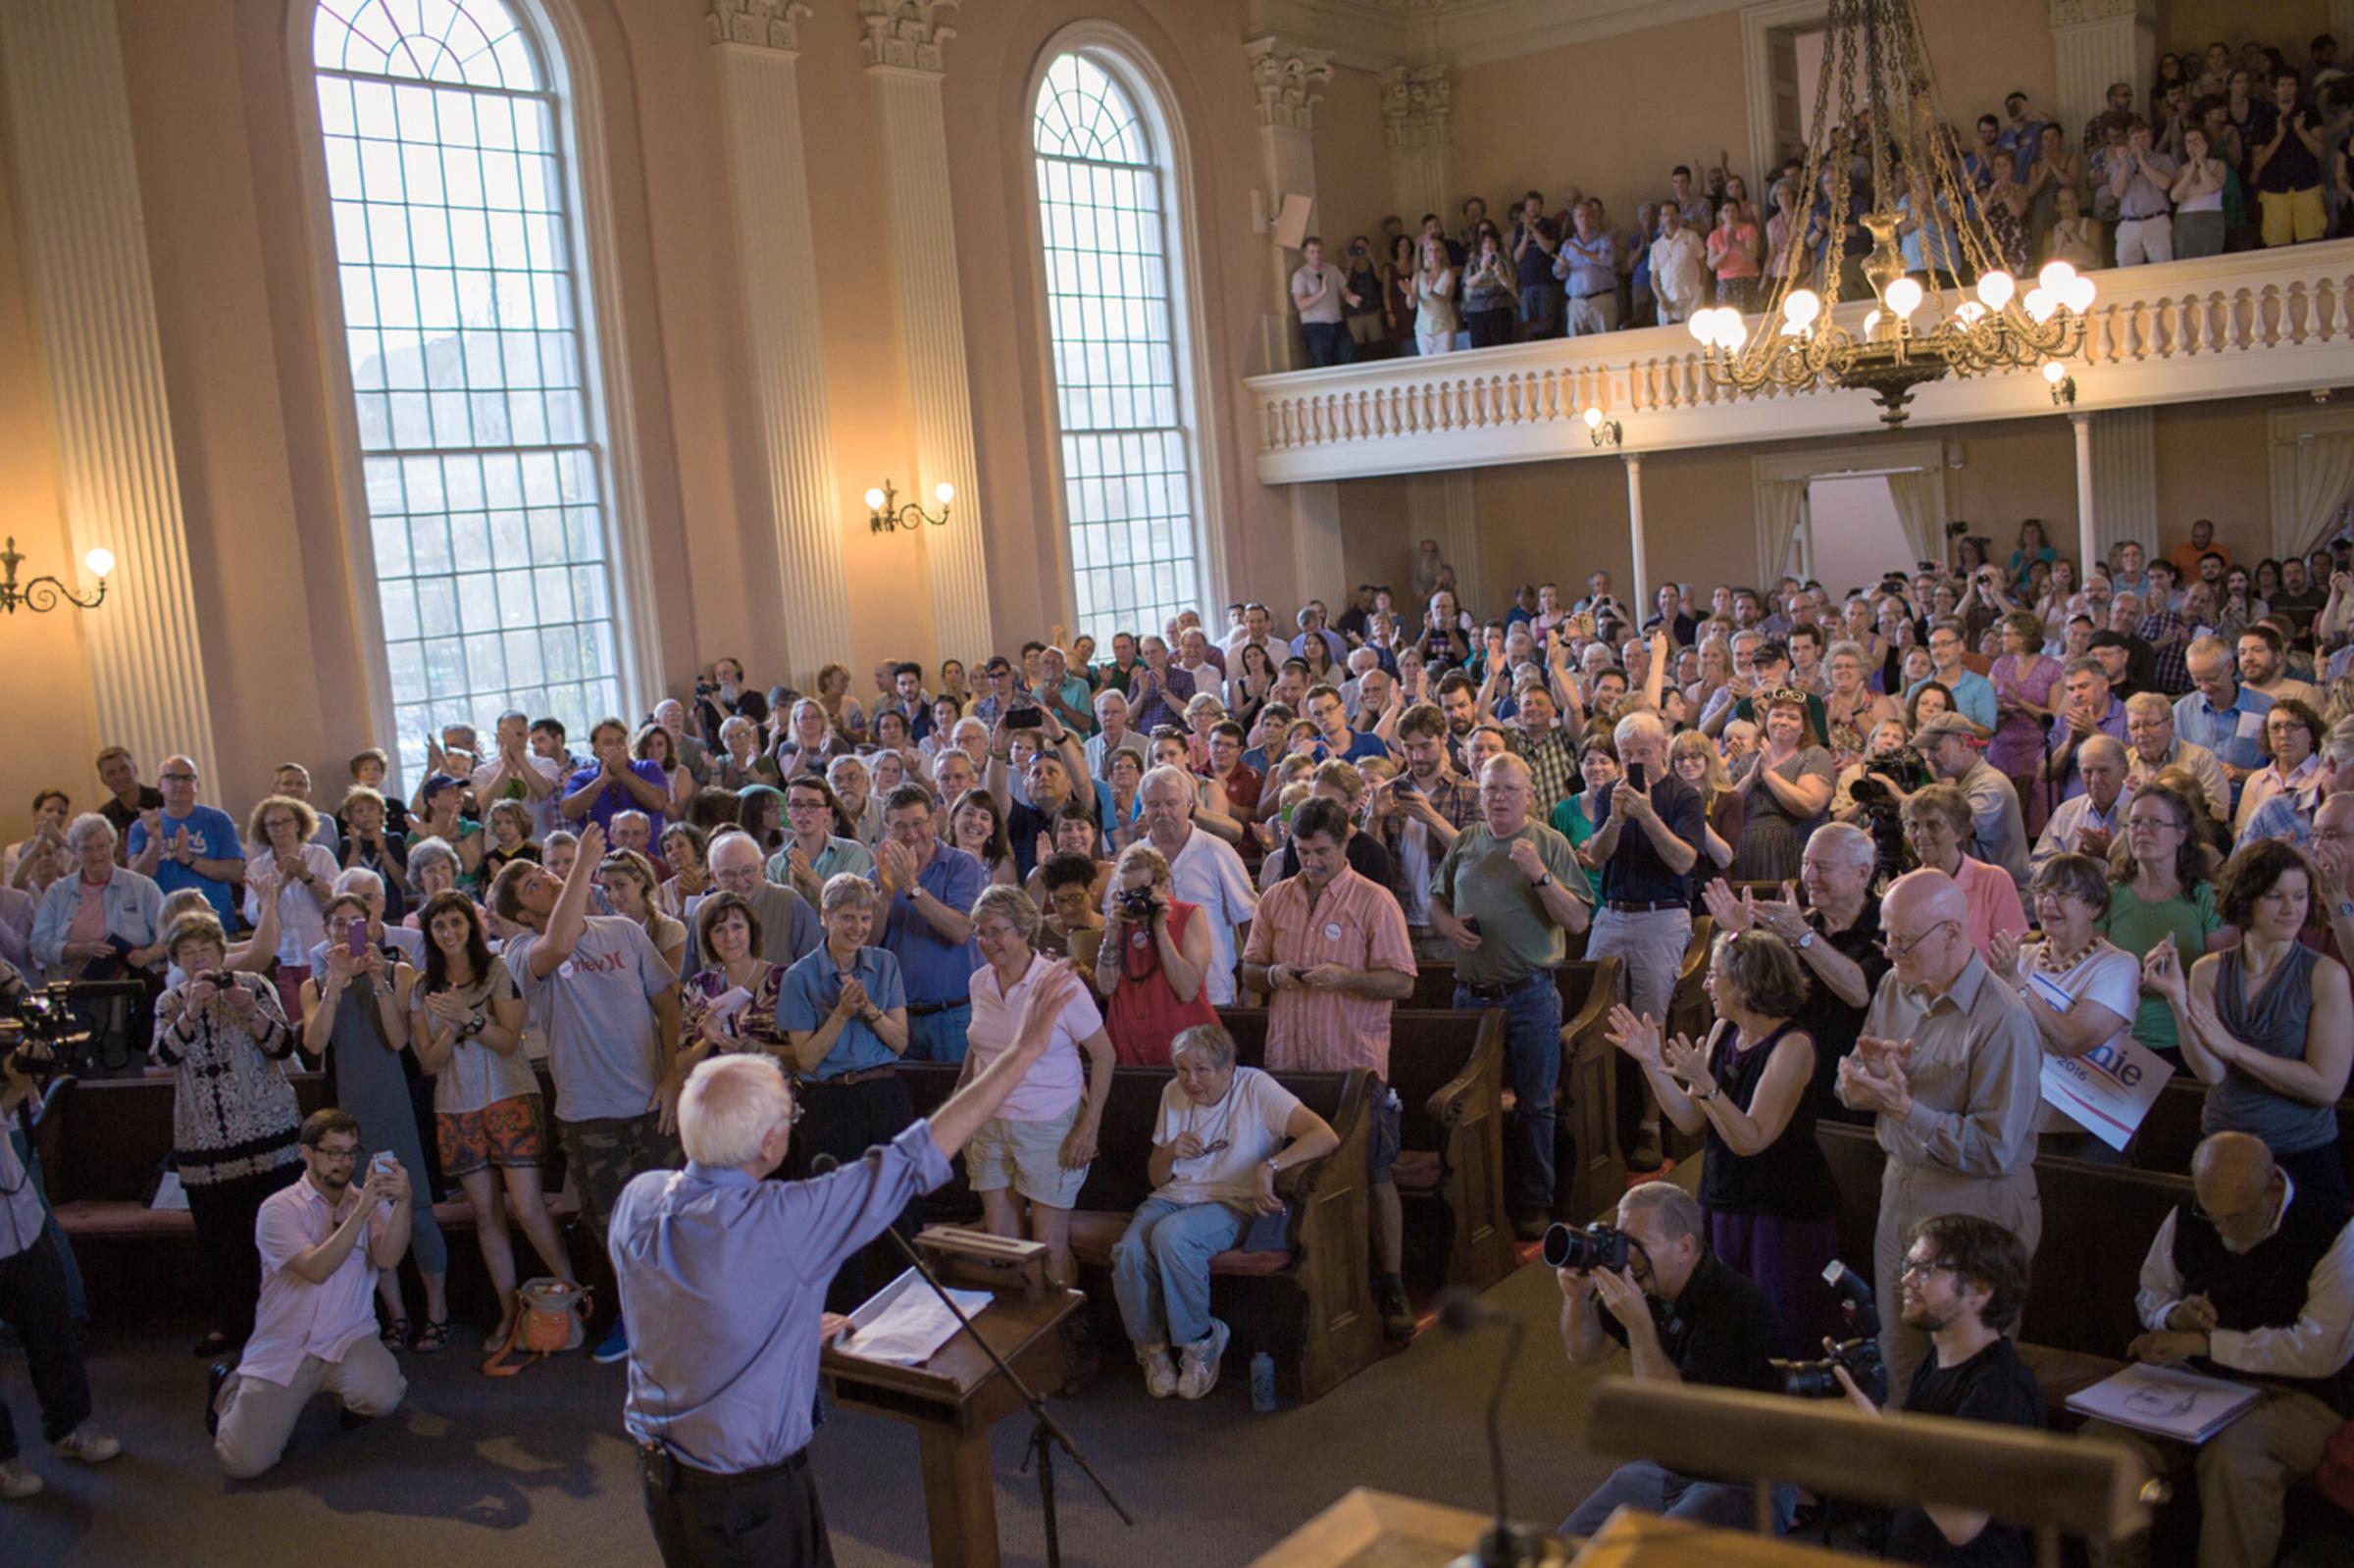 Sen.Bernie Sanders addresses a packed crowd on his first day of campaigning at the South Church in Portsmouth, N.H, May 27, 2015.